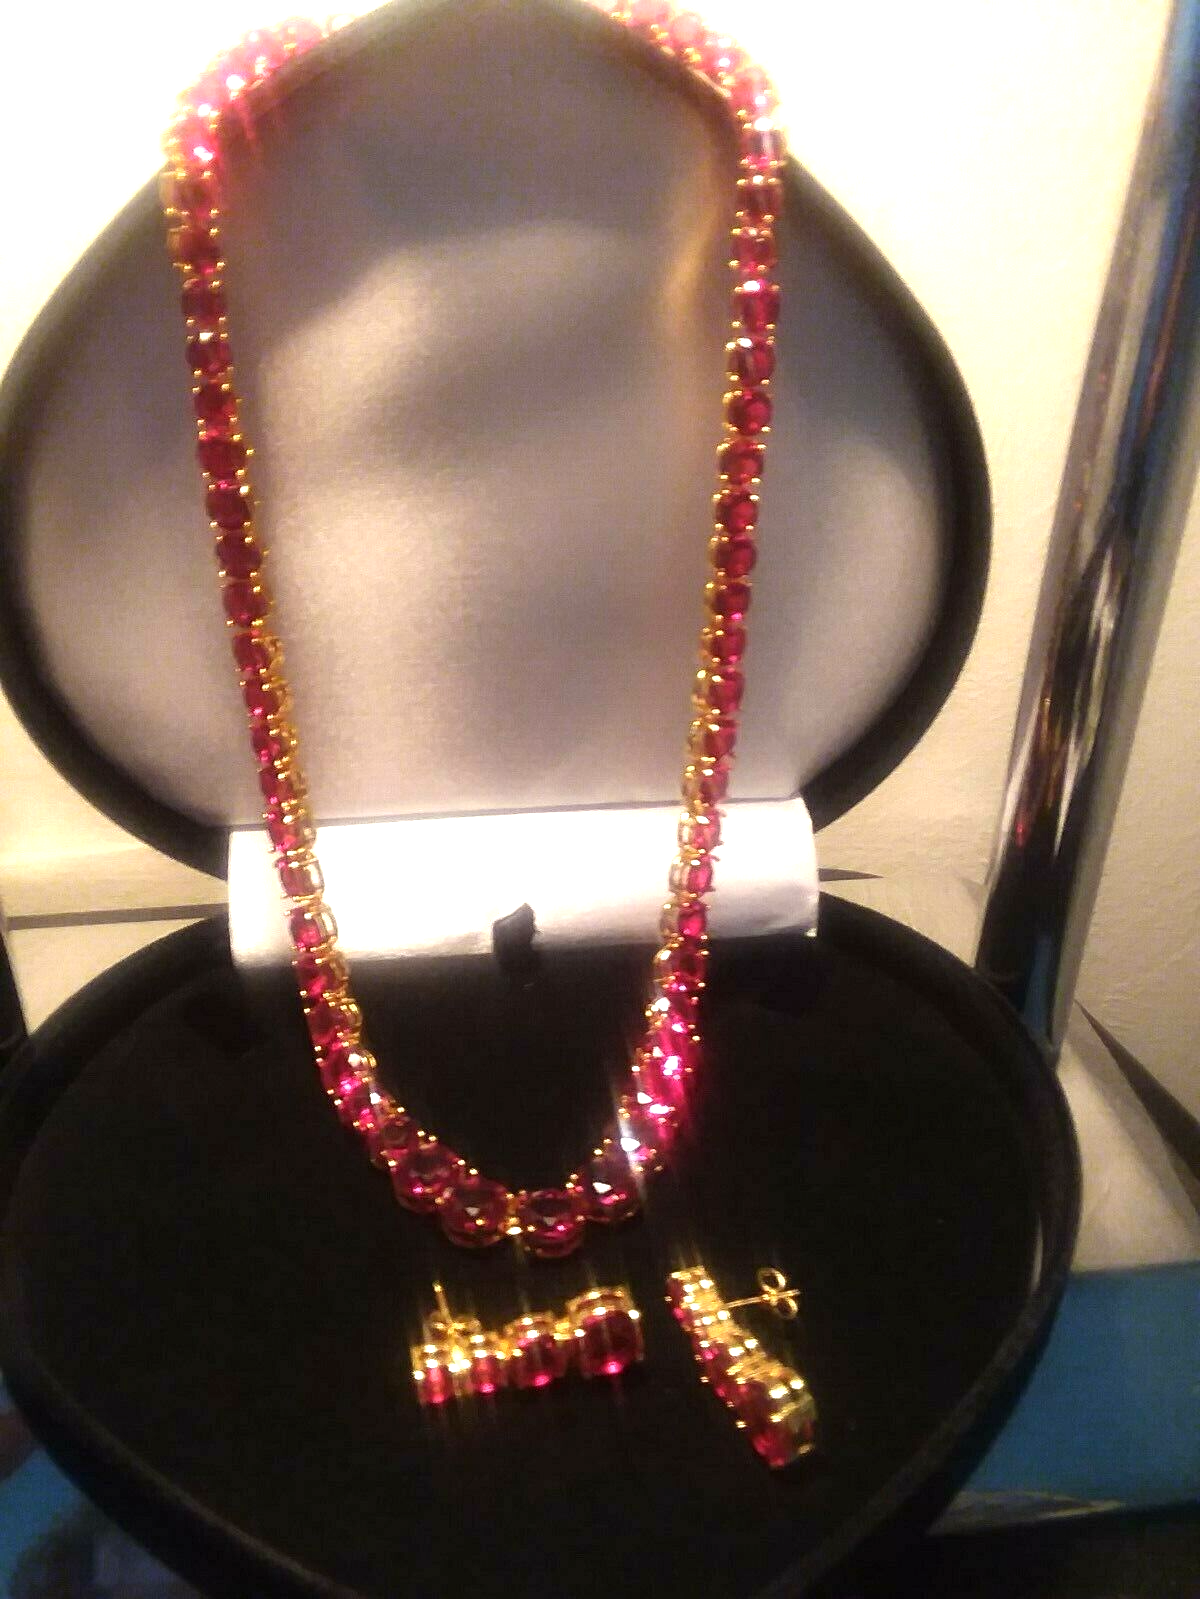  14K GOLD CLAD  96CTW   LAB RED RUBY TENNIS NECKLACE 18 INCH +  BONUS EARRINGS!  EXCEPTIONALBUY